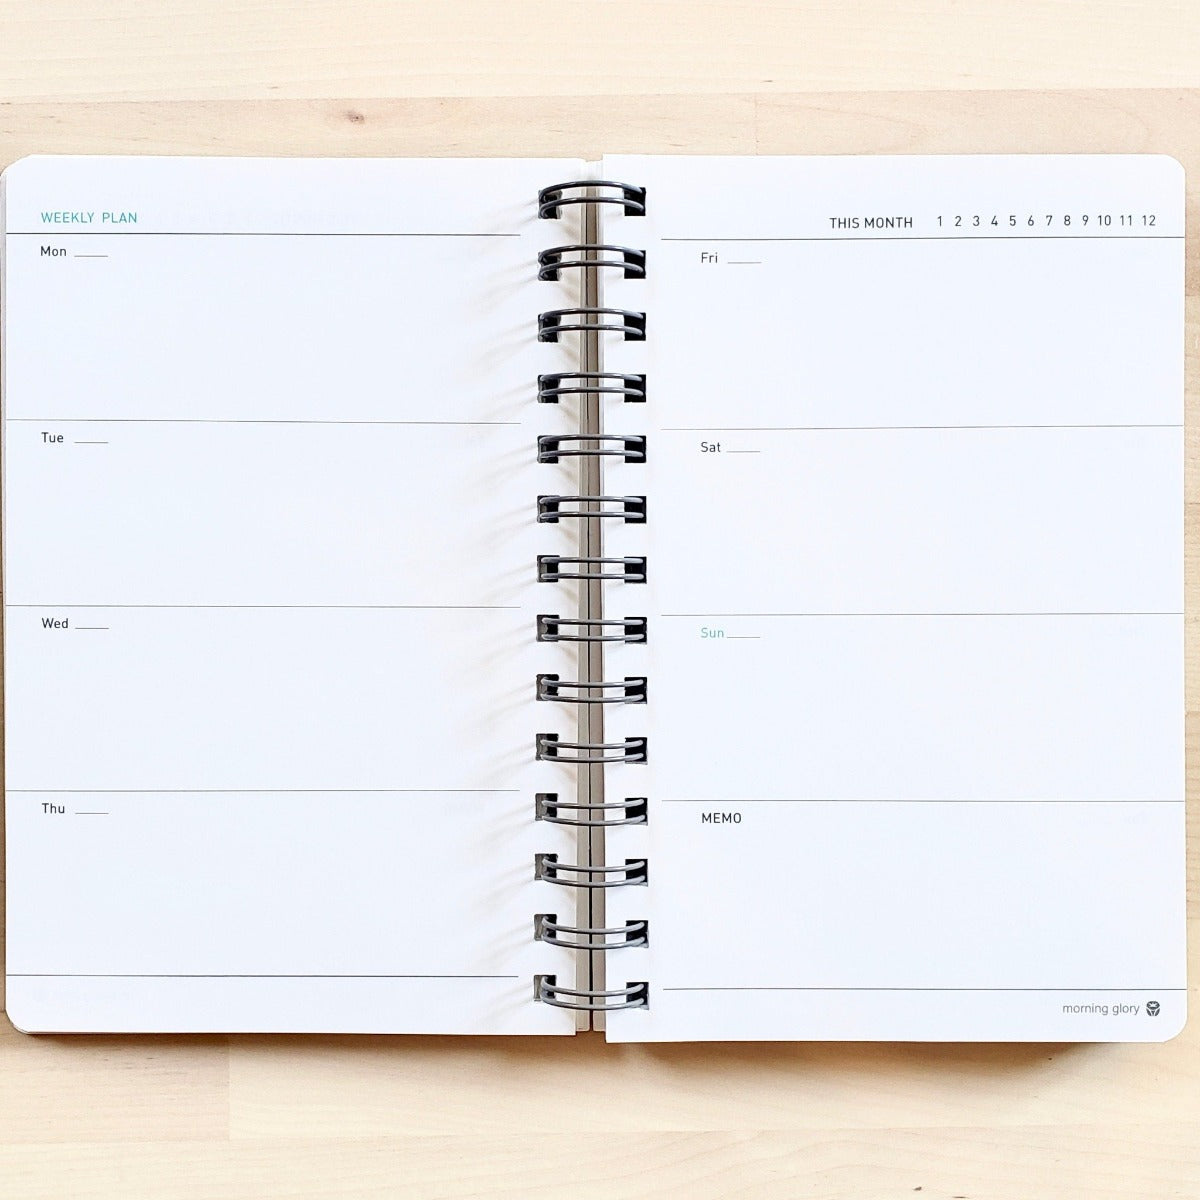 weekly planning pages of light morning glory scheduler